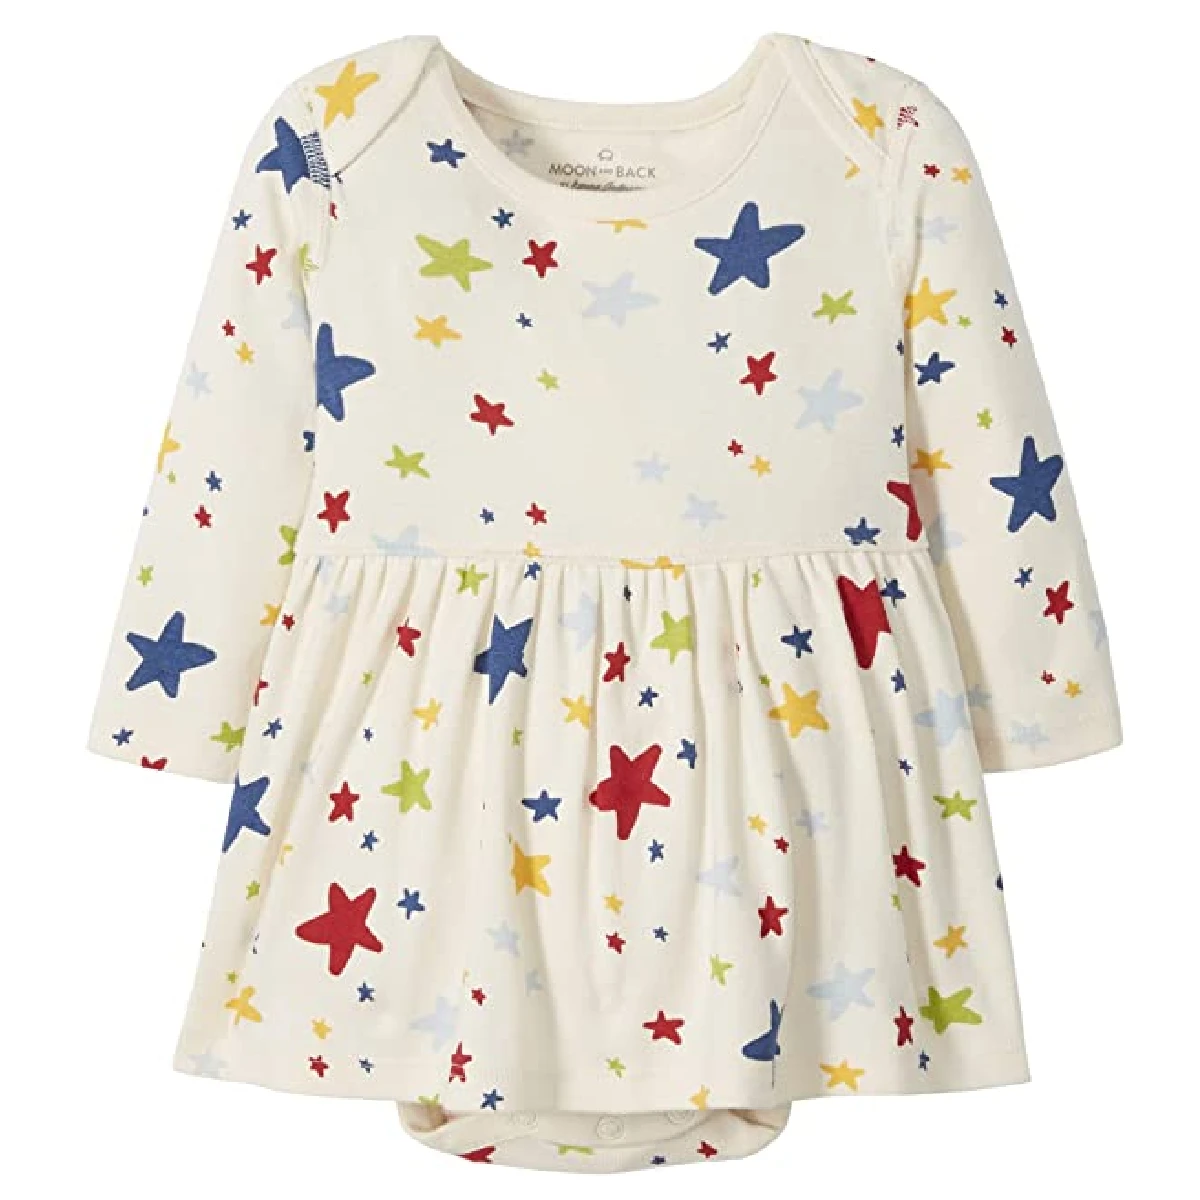 Moon and Back by Hanna Andersson Girls Toddler Organic Play Dress with Diaper Cover